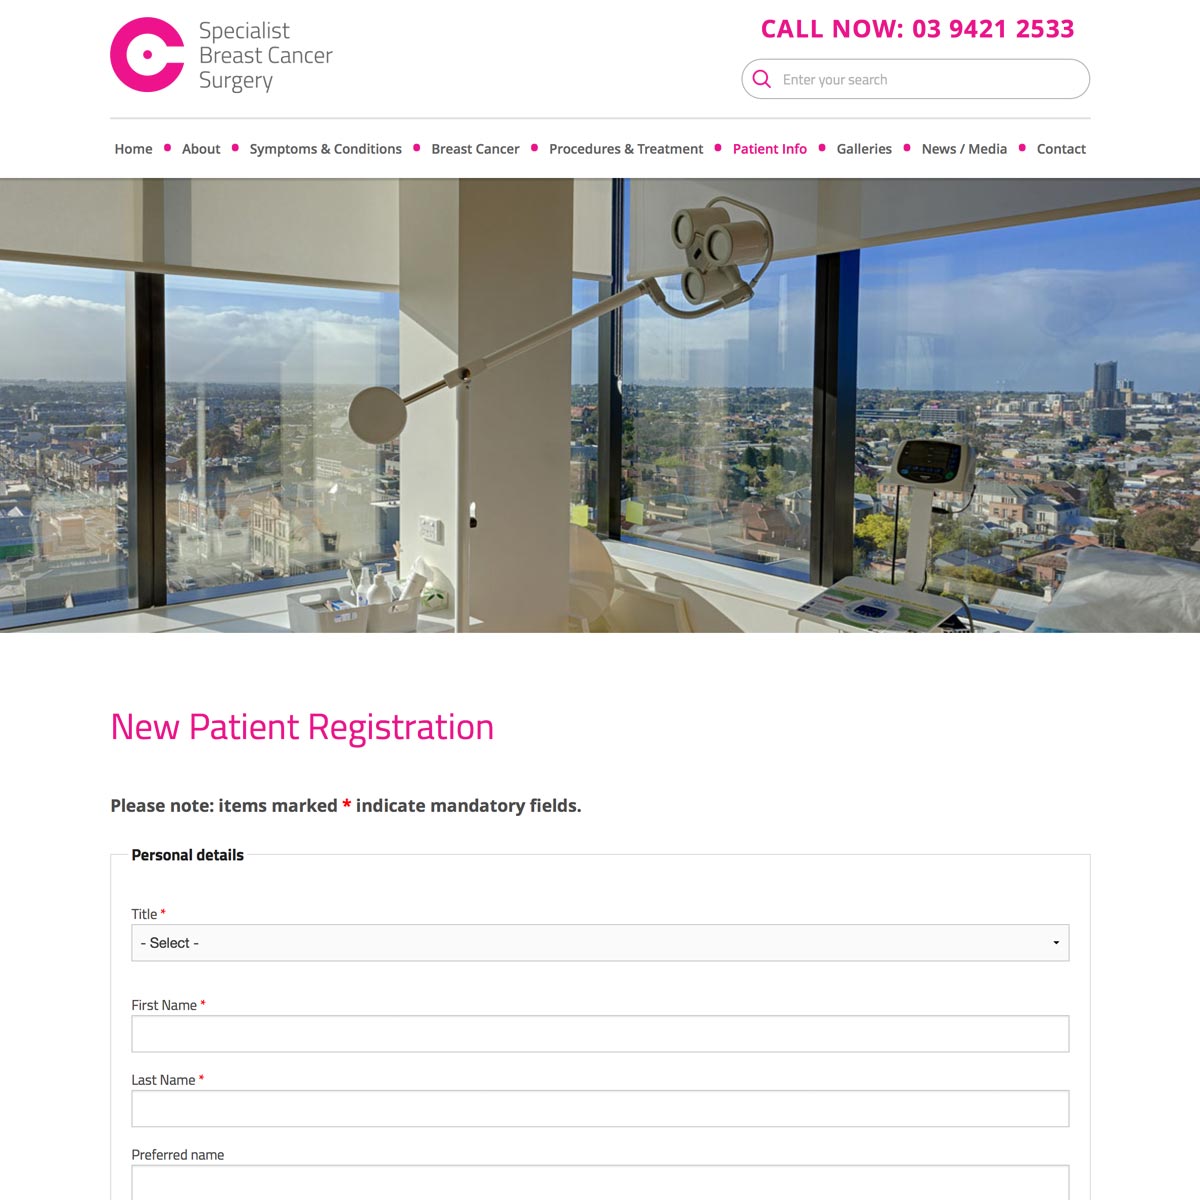 Breast Cancer Specialist - New Patient Registration